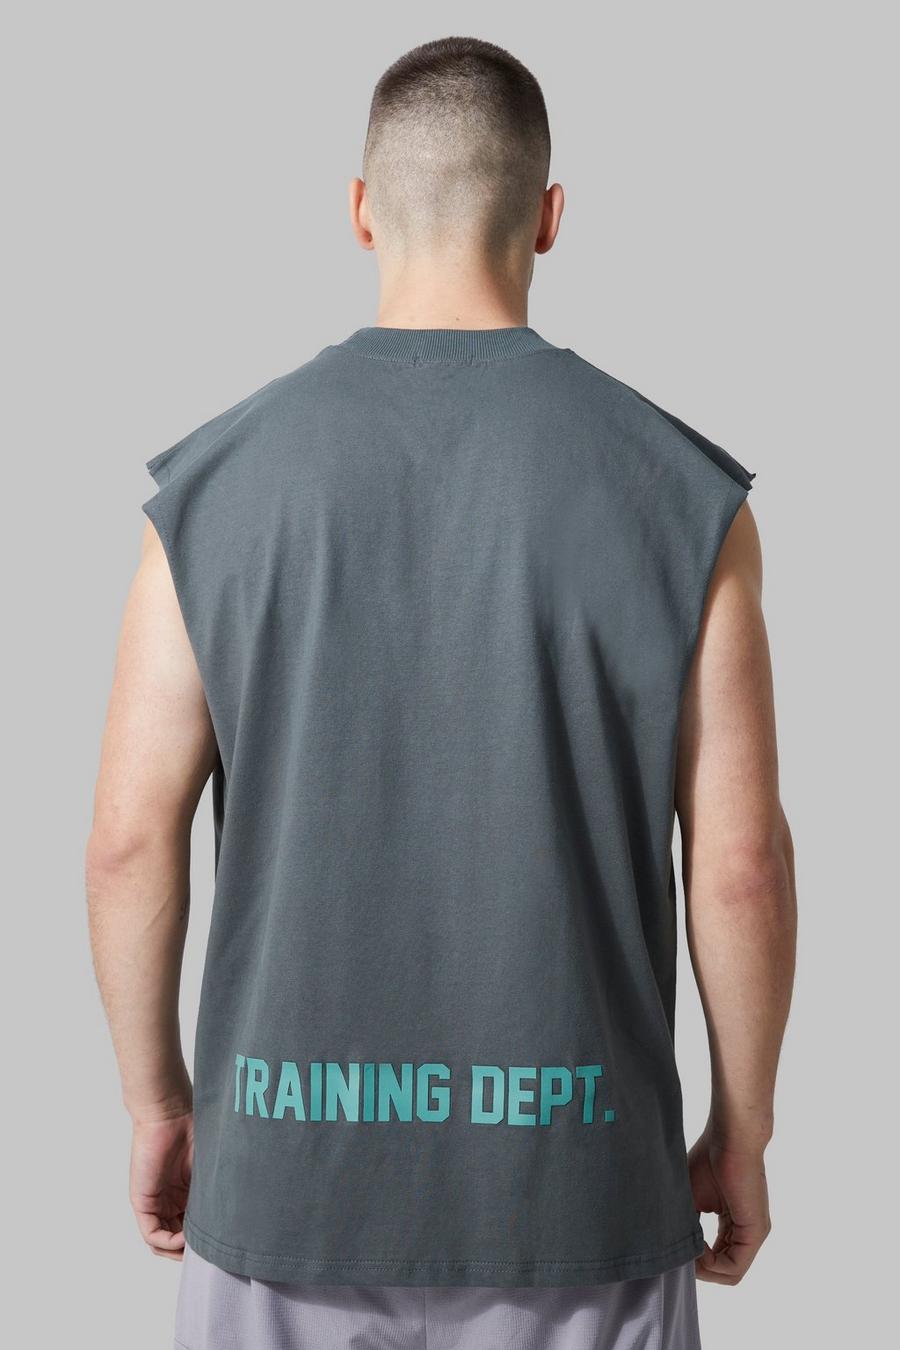 Charcoal gris Tall Active Training Dept Oversized Extended Tank